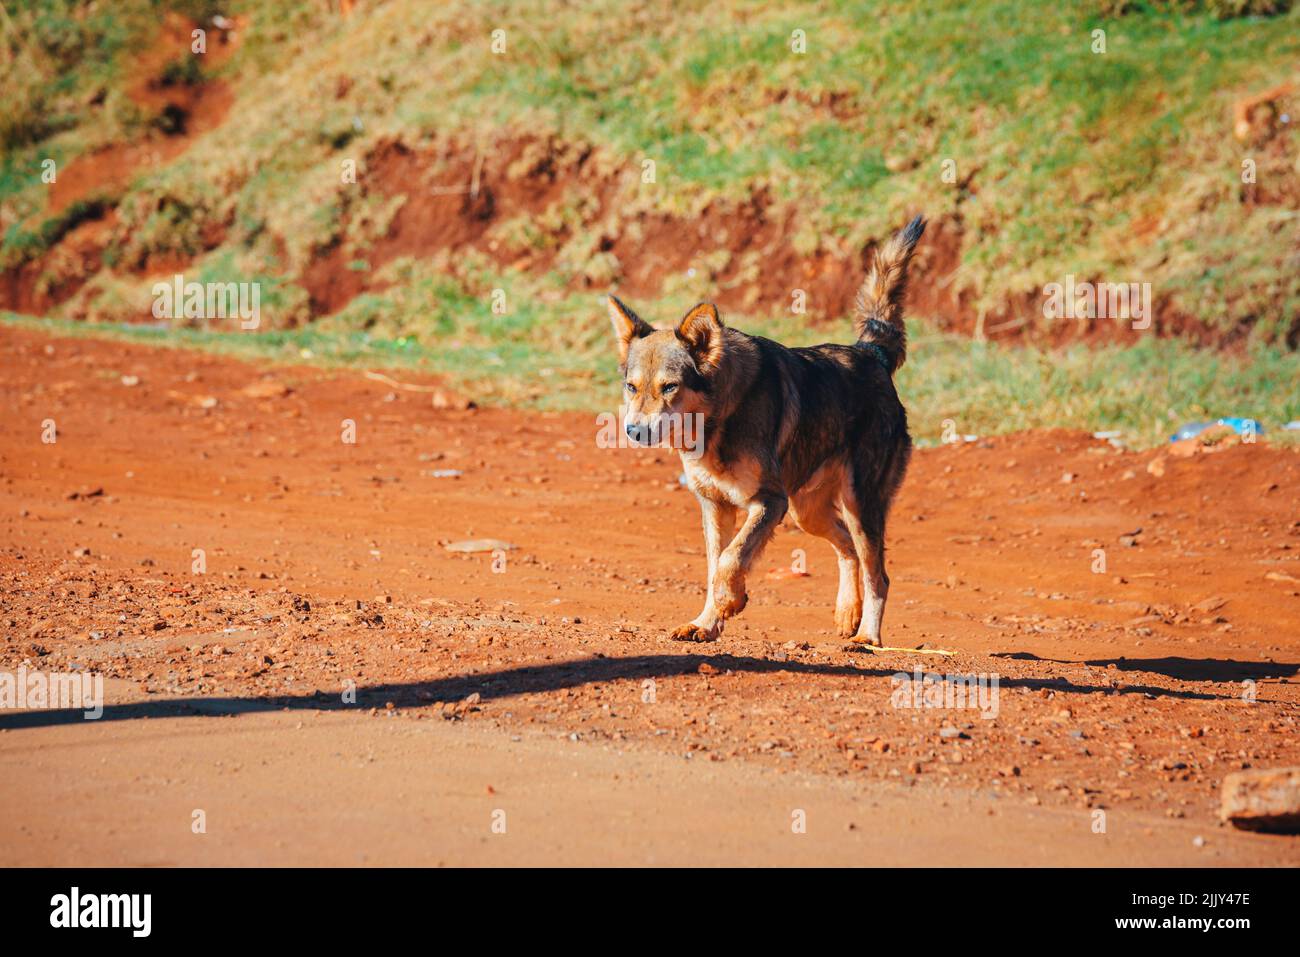 A dog in Africa, a free-roaming dog in downtown Eldoret. Kenya, Africa Stock Photo